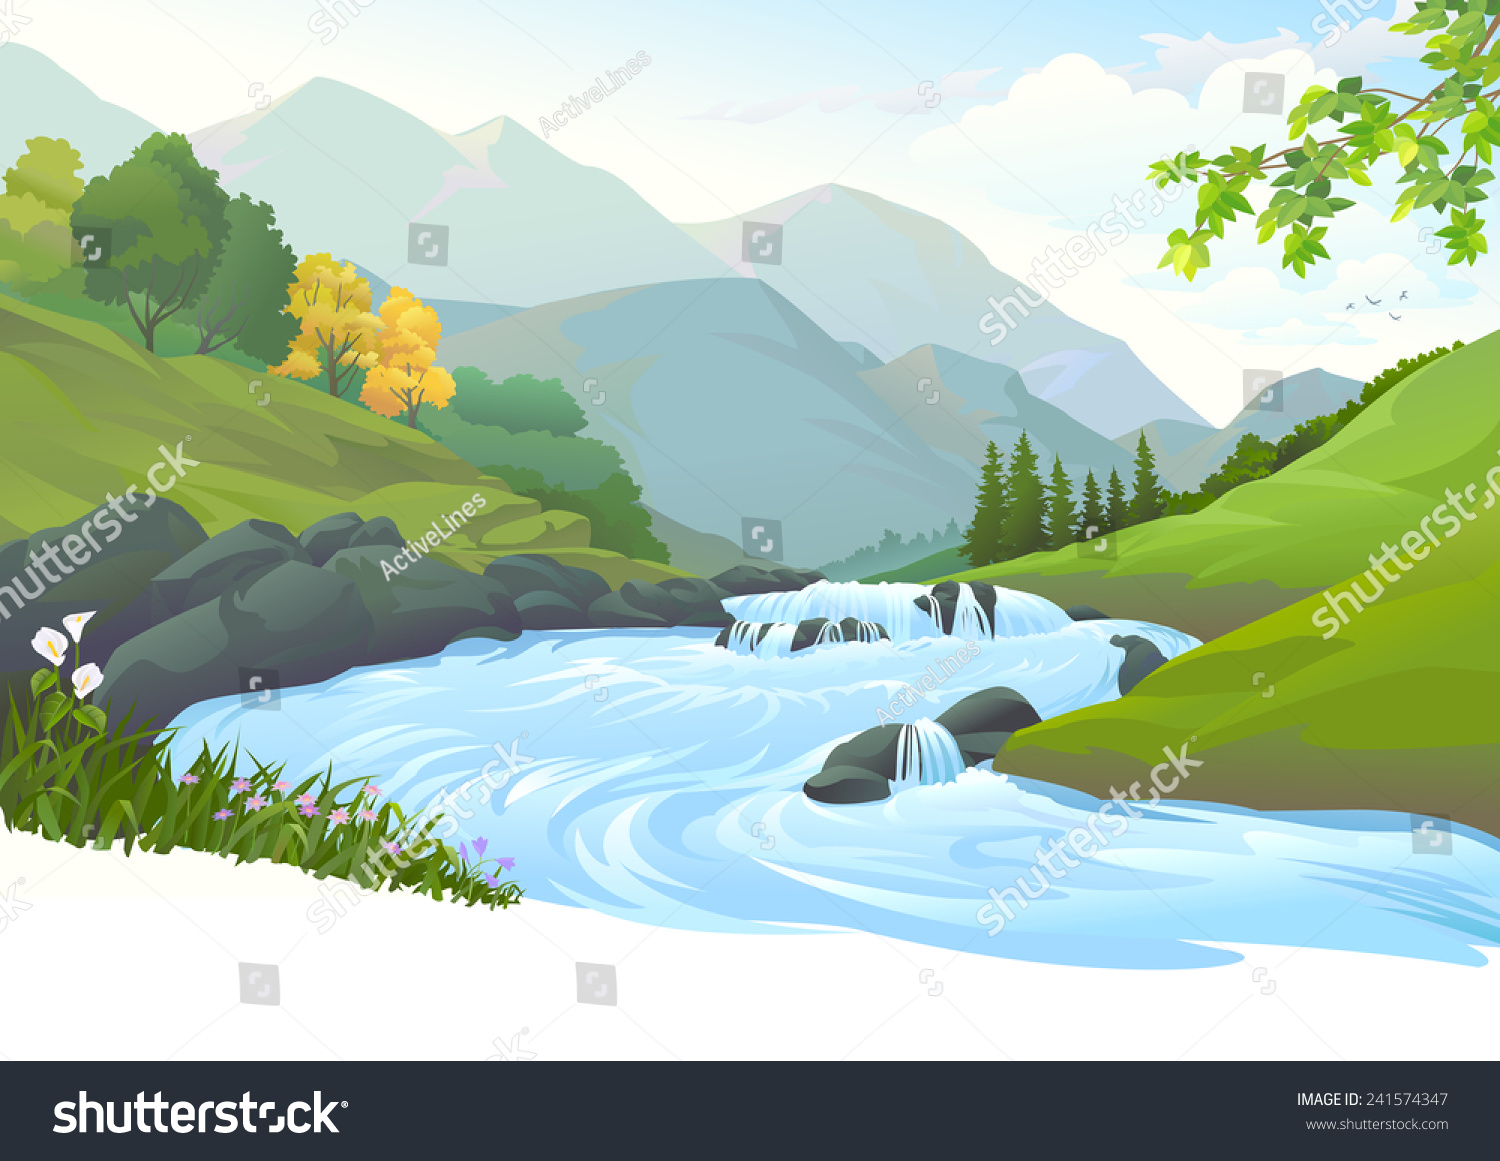 clipart flowing river - photo #41